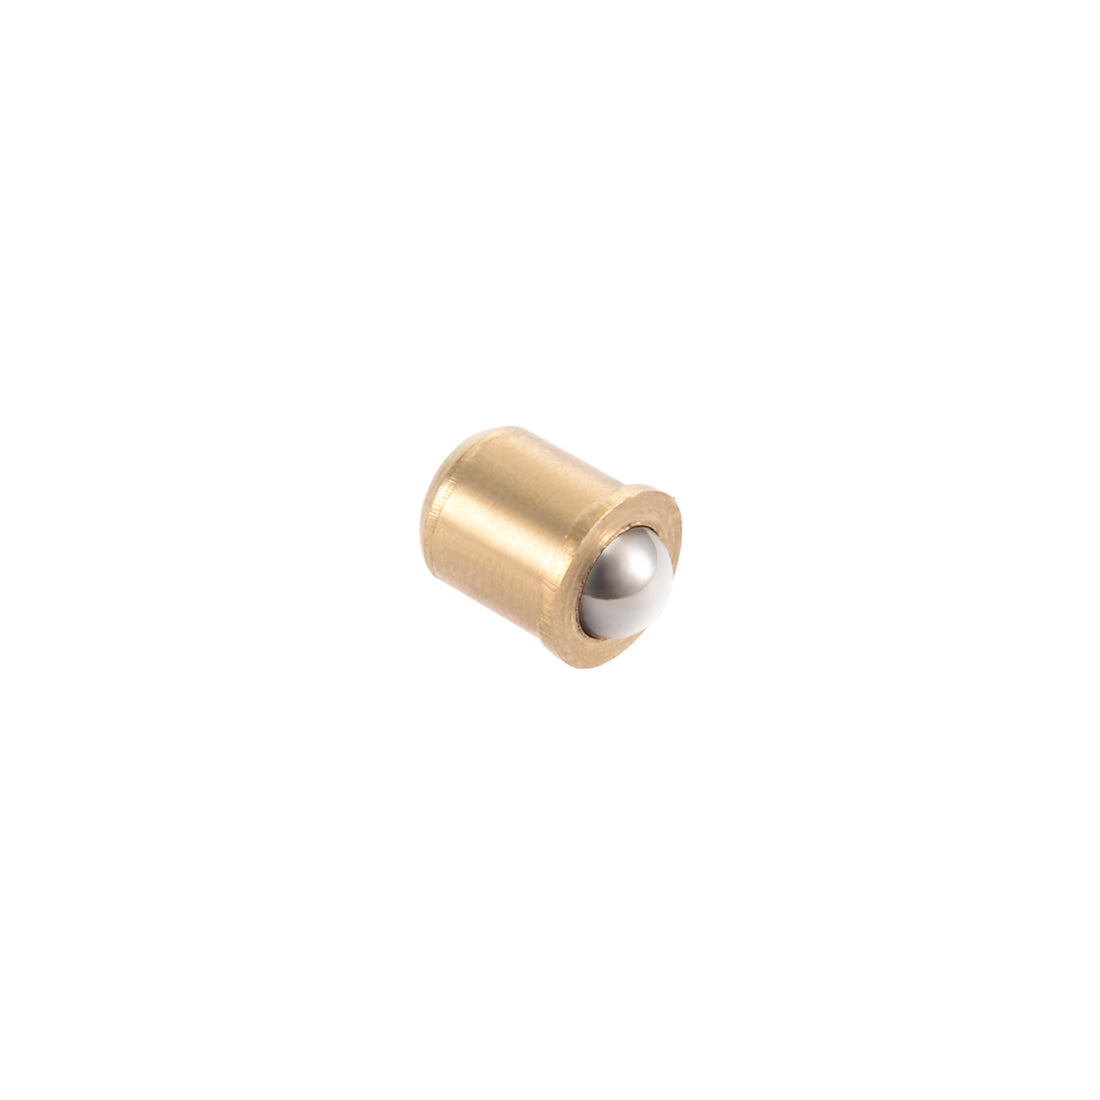 uxcell Uxcell 5mm Ball Dia Brass Electroplating Door Cabinet Ball Catch Latch Closures 10pcs